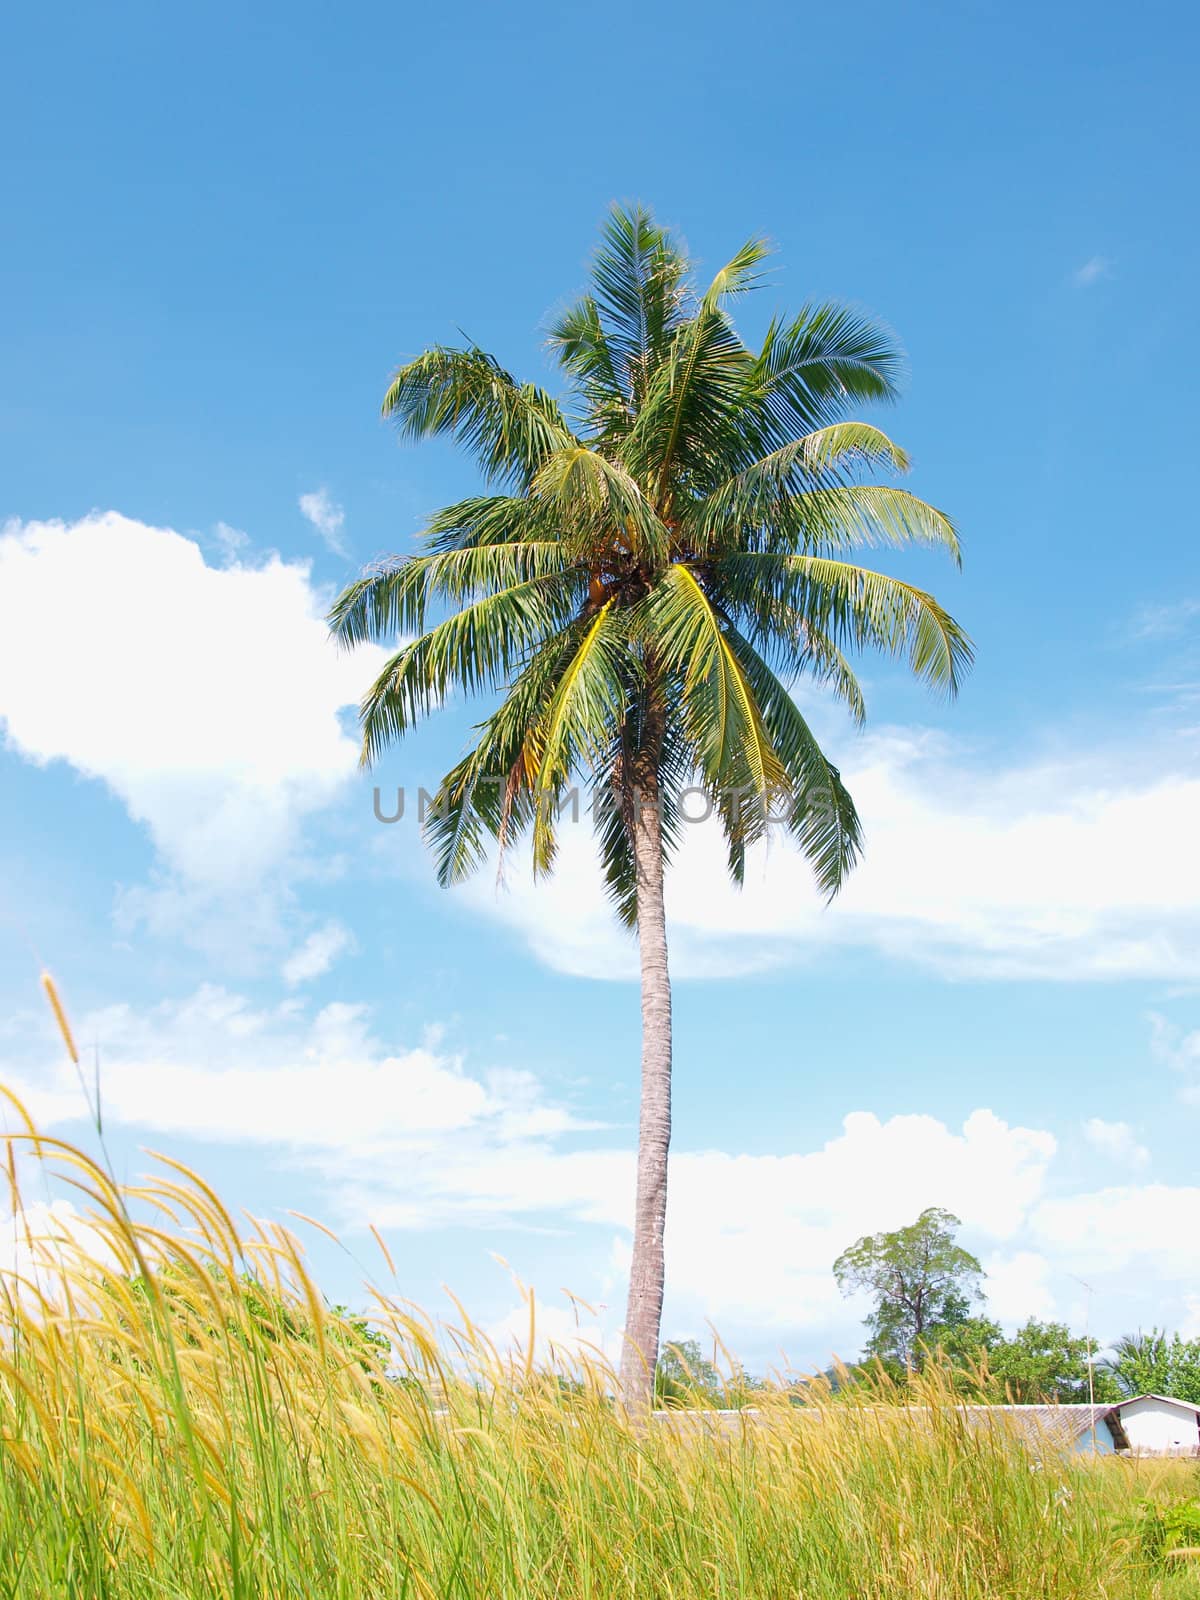 Coconut trees with blue sky and green grass in Thailand by jakgree